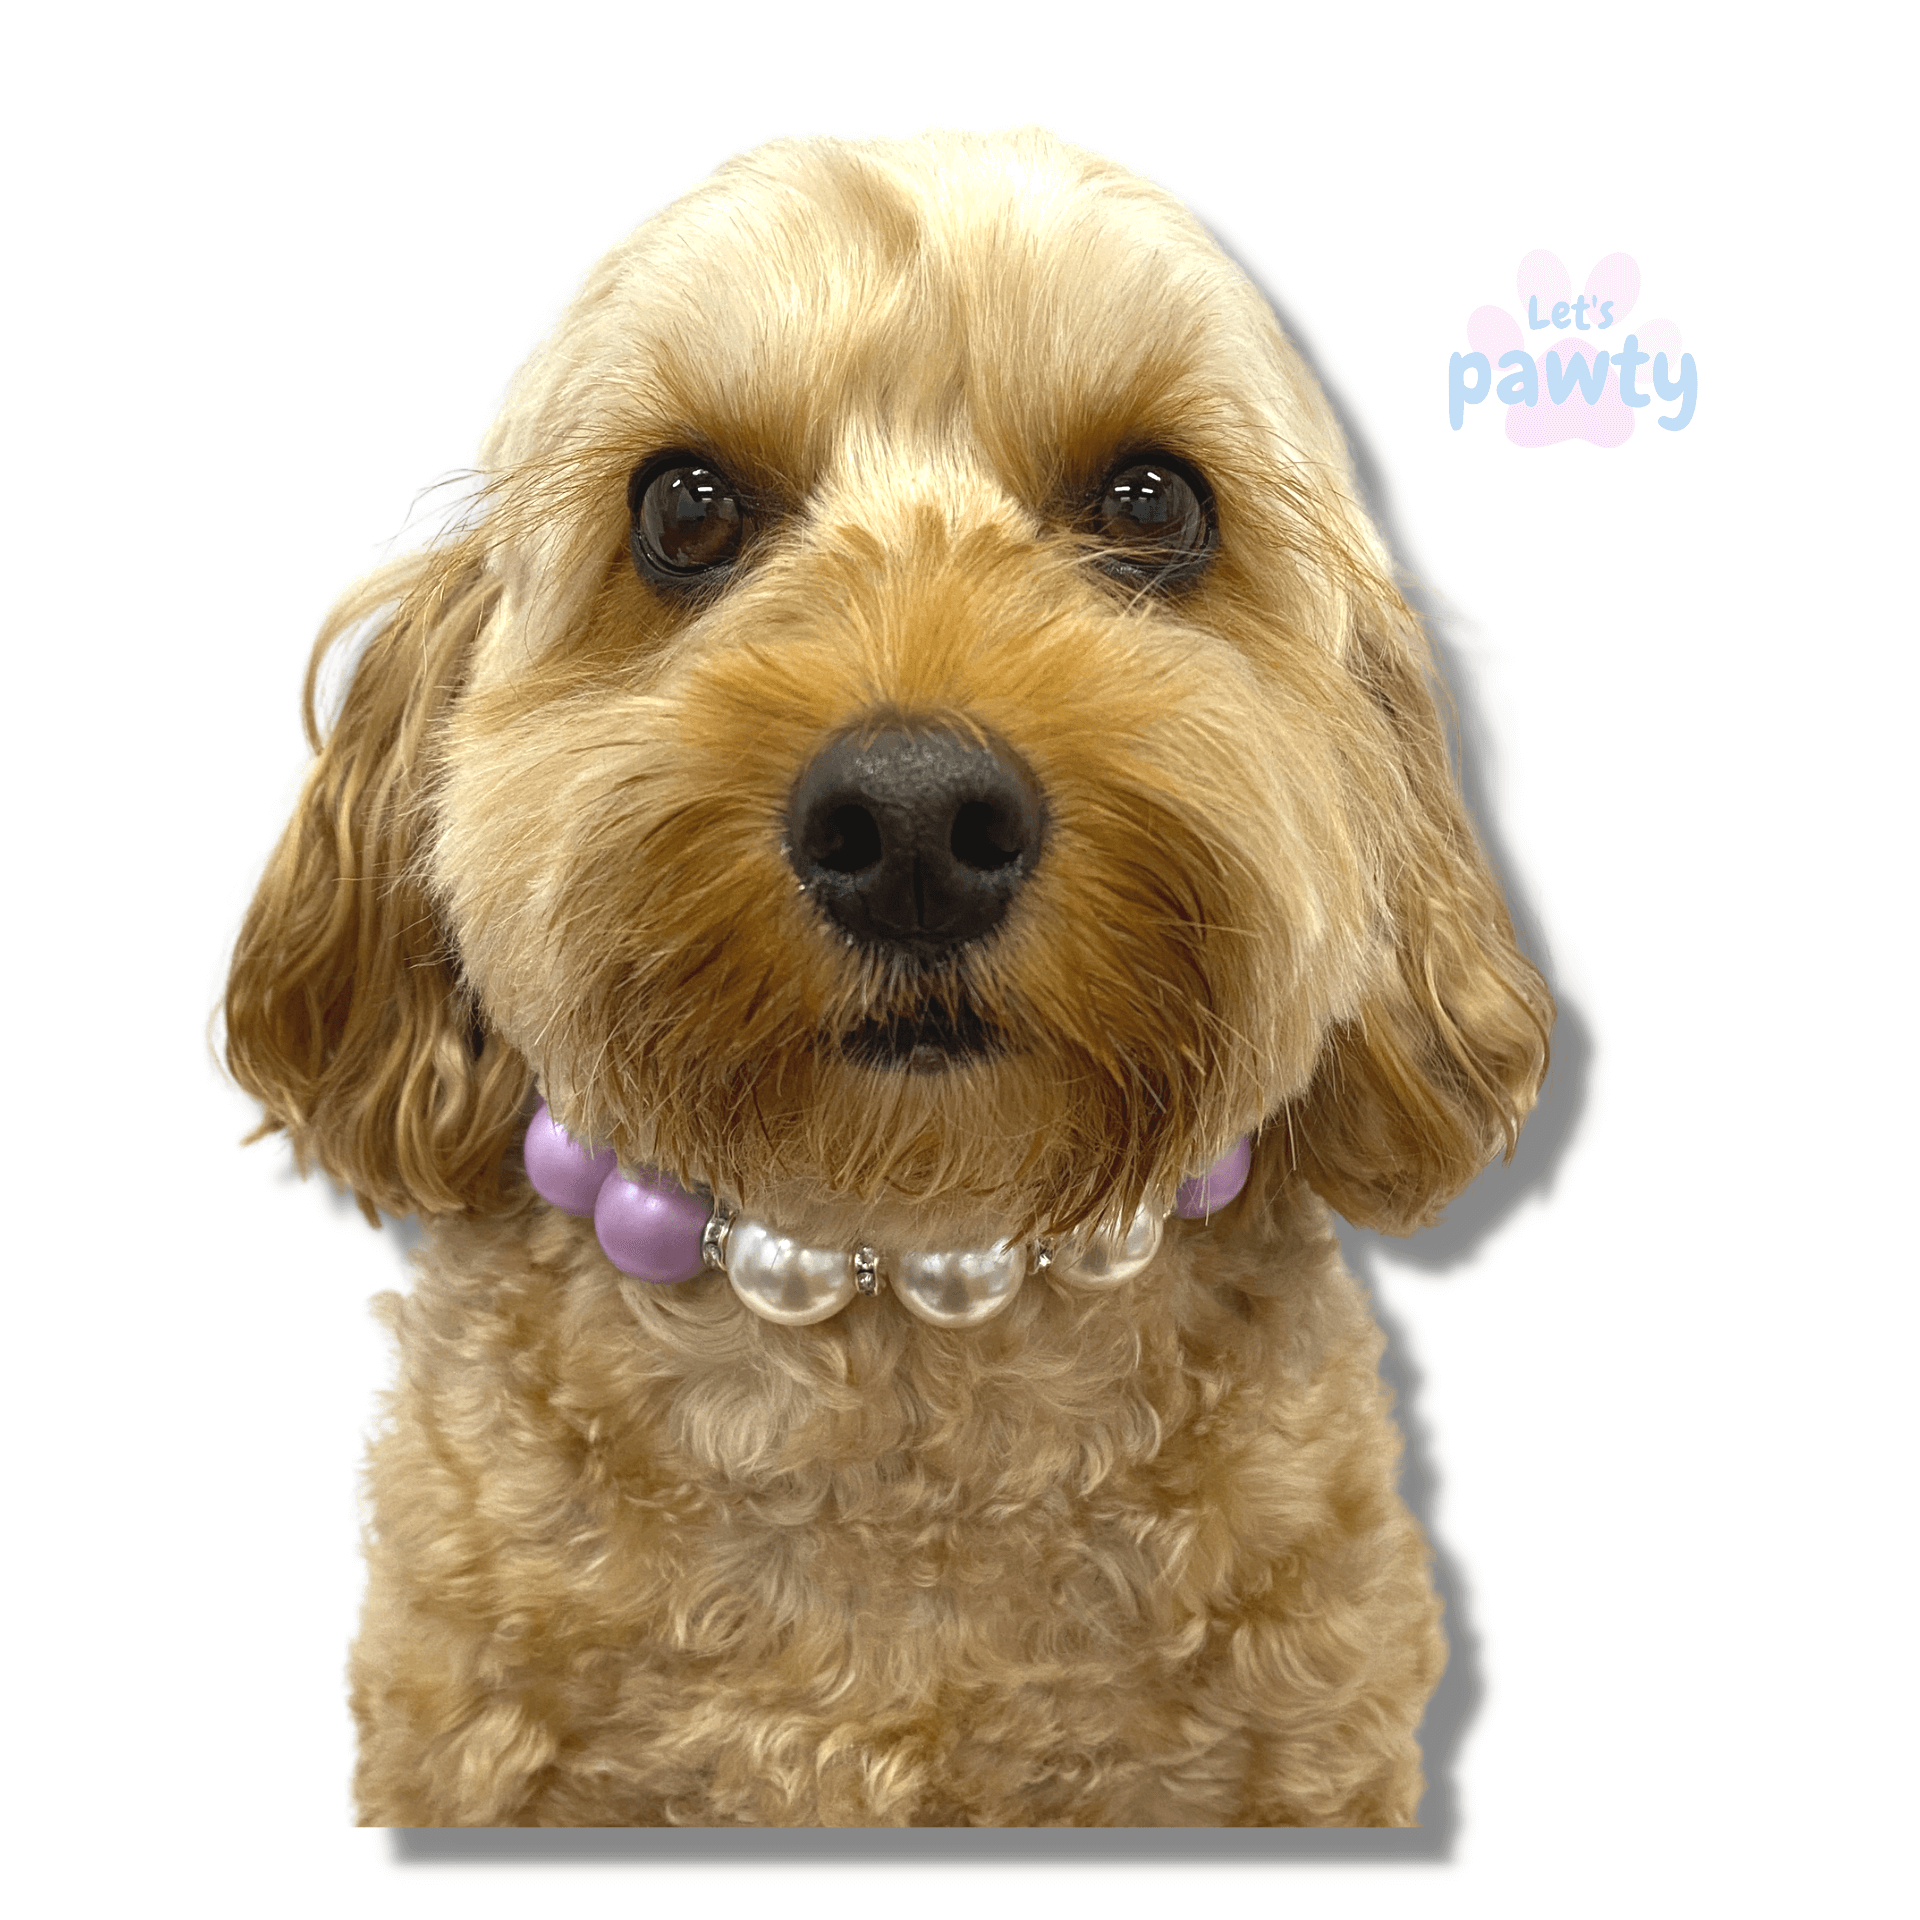 Beaded dog jewellery necklace, let's pawty